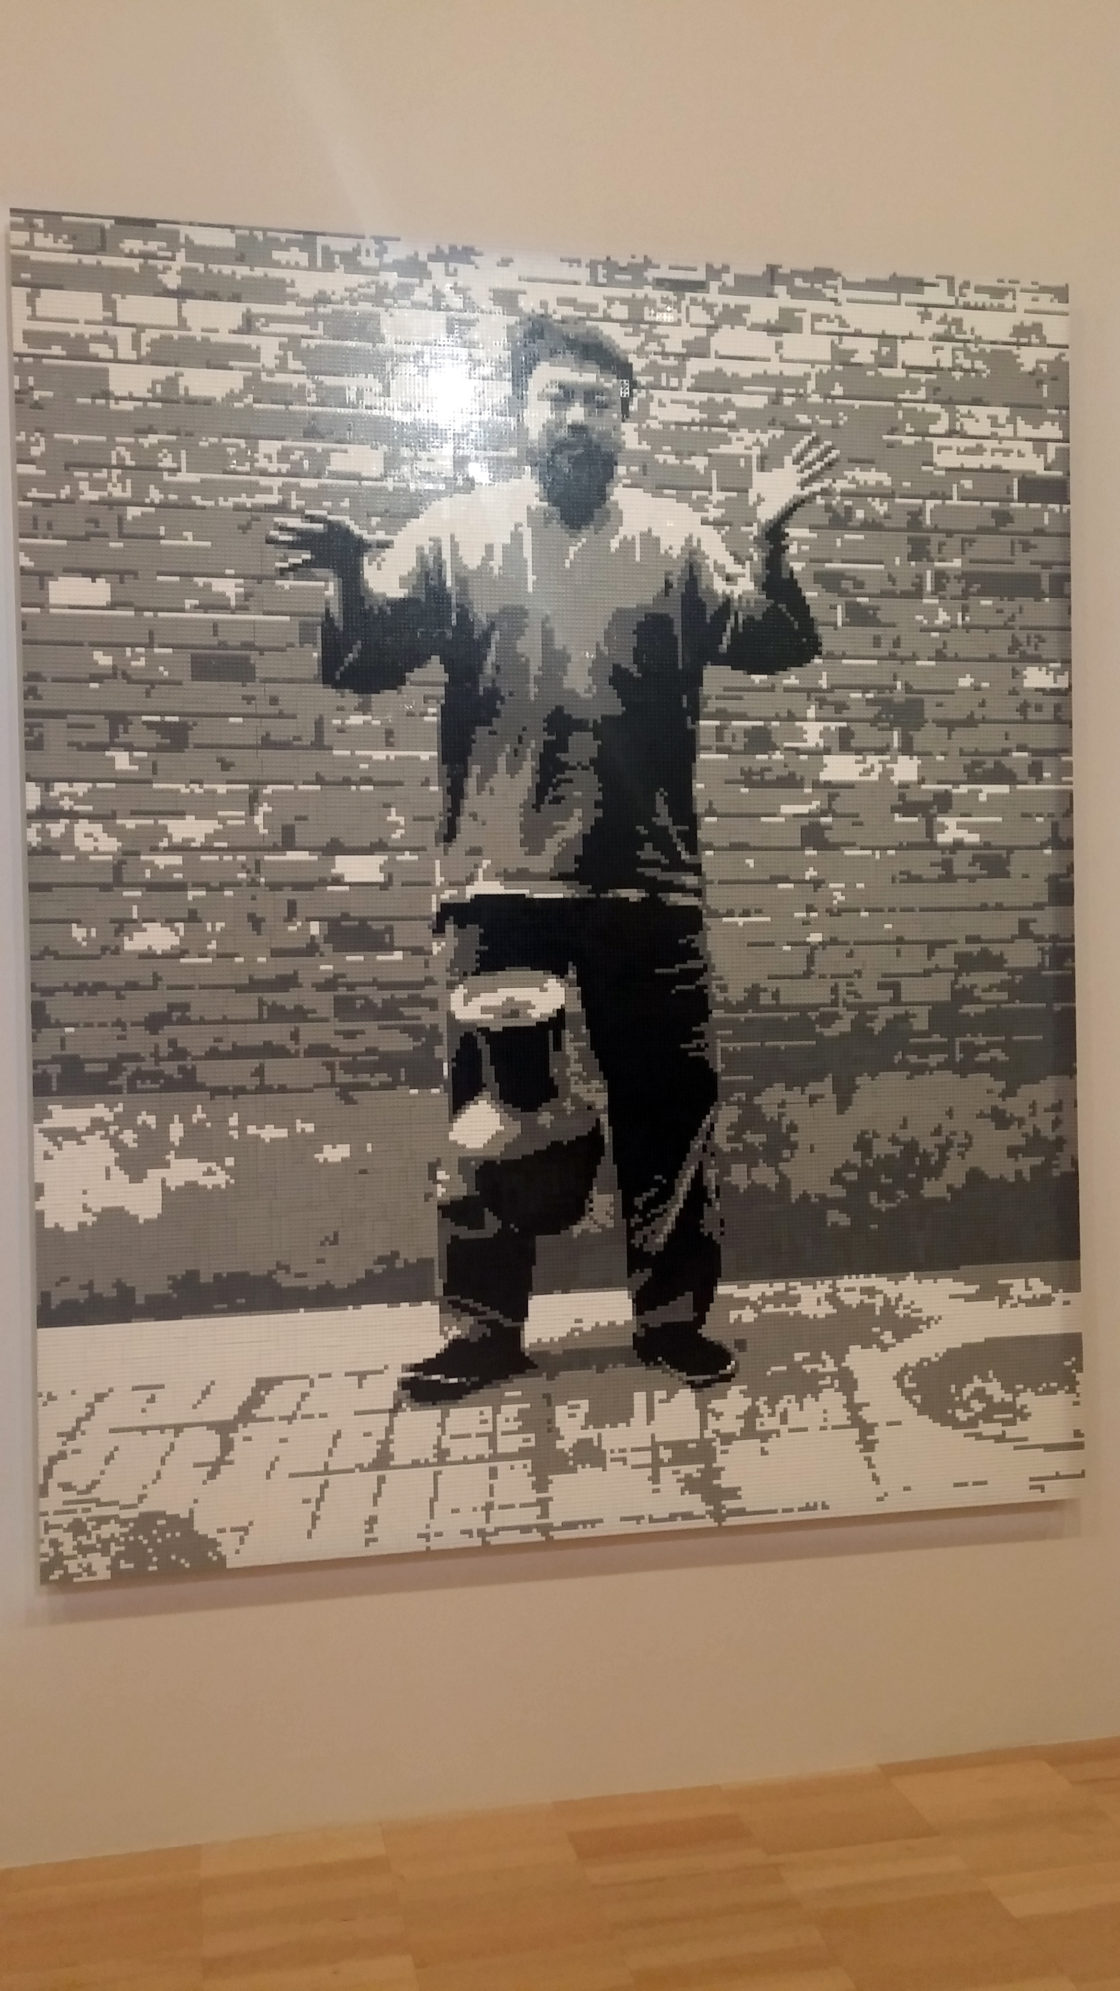 ANDY WARHOL & AI WEIWEI. National Gallery of Victoria